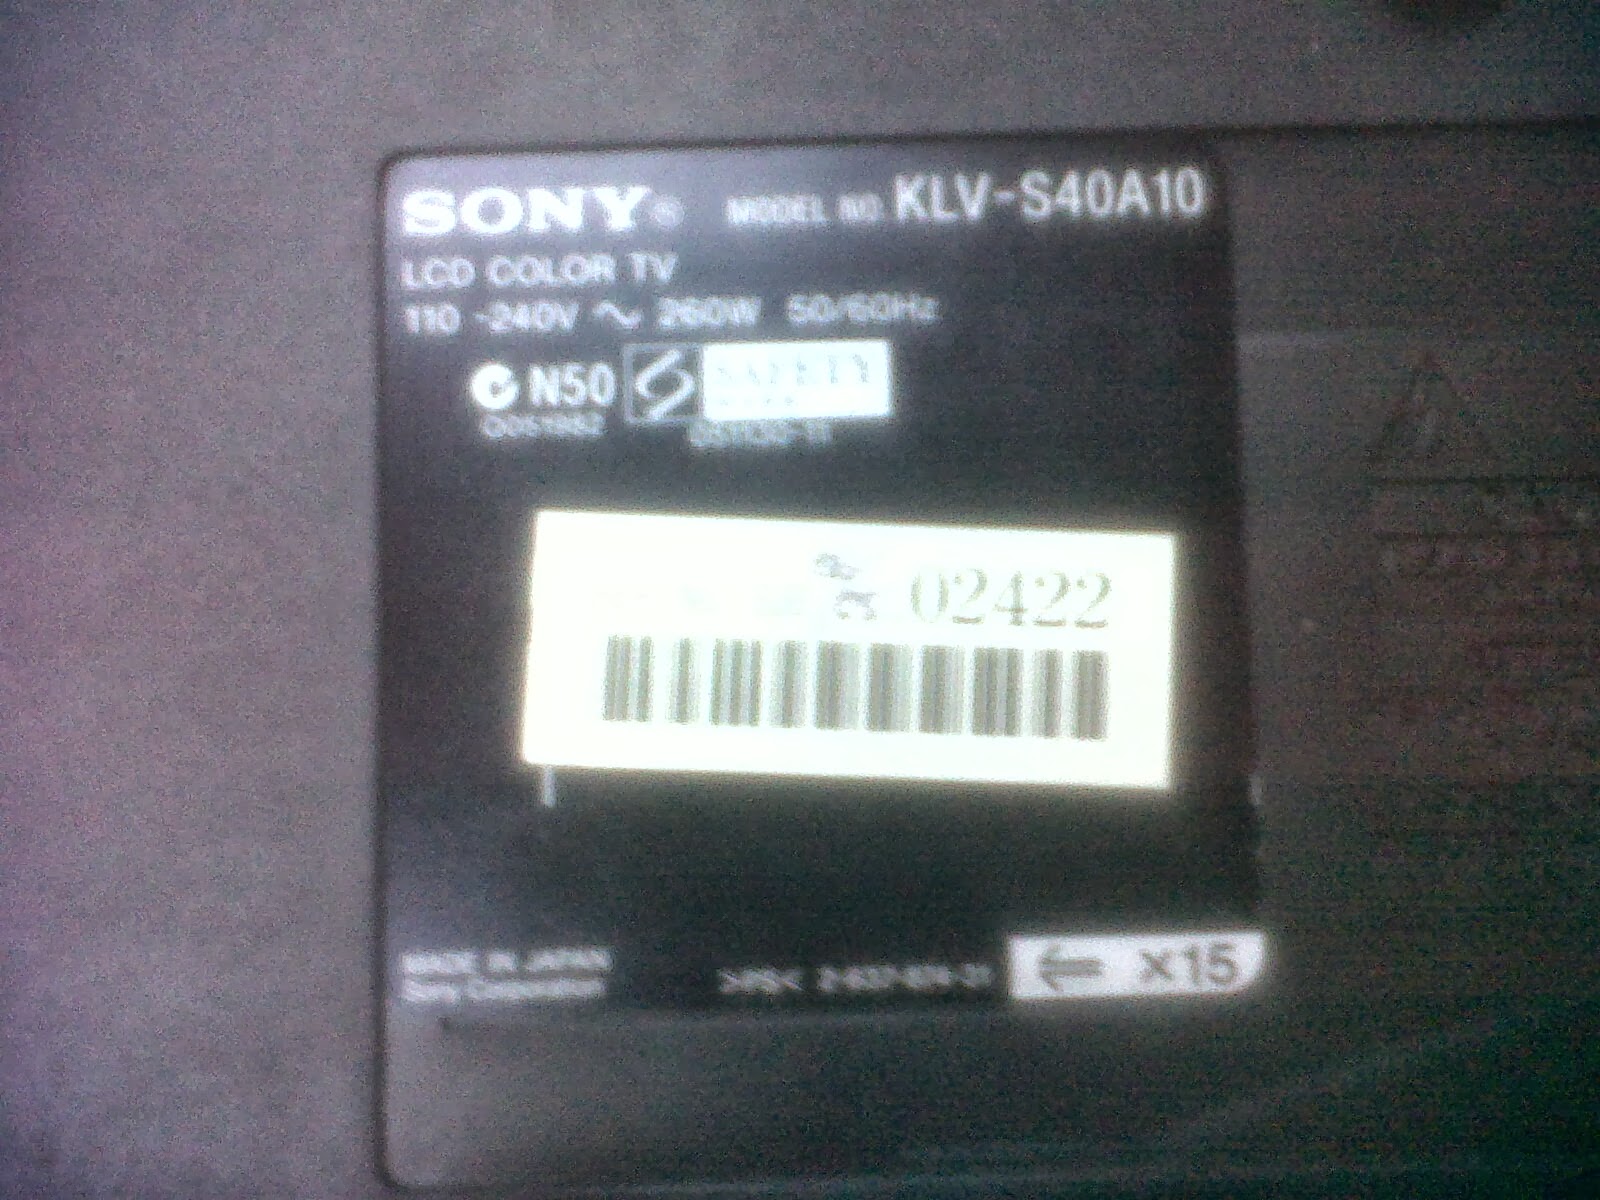 Lcd sony klv-s40a10 mati/proteck/indikator stby kedip 4x 